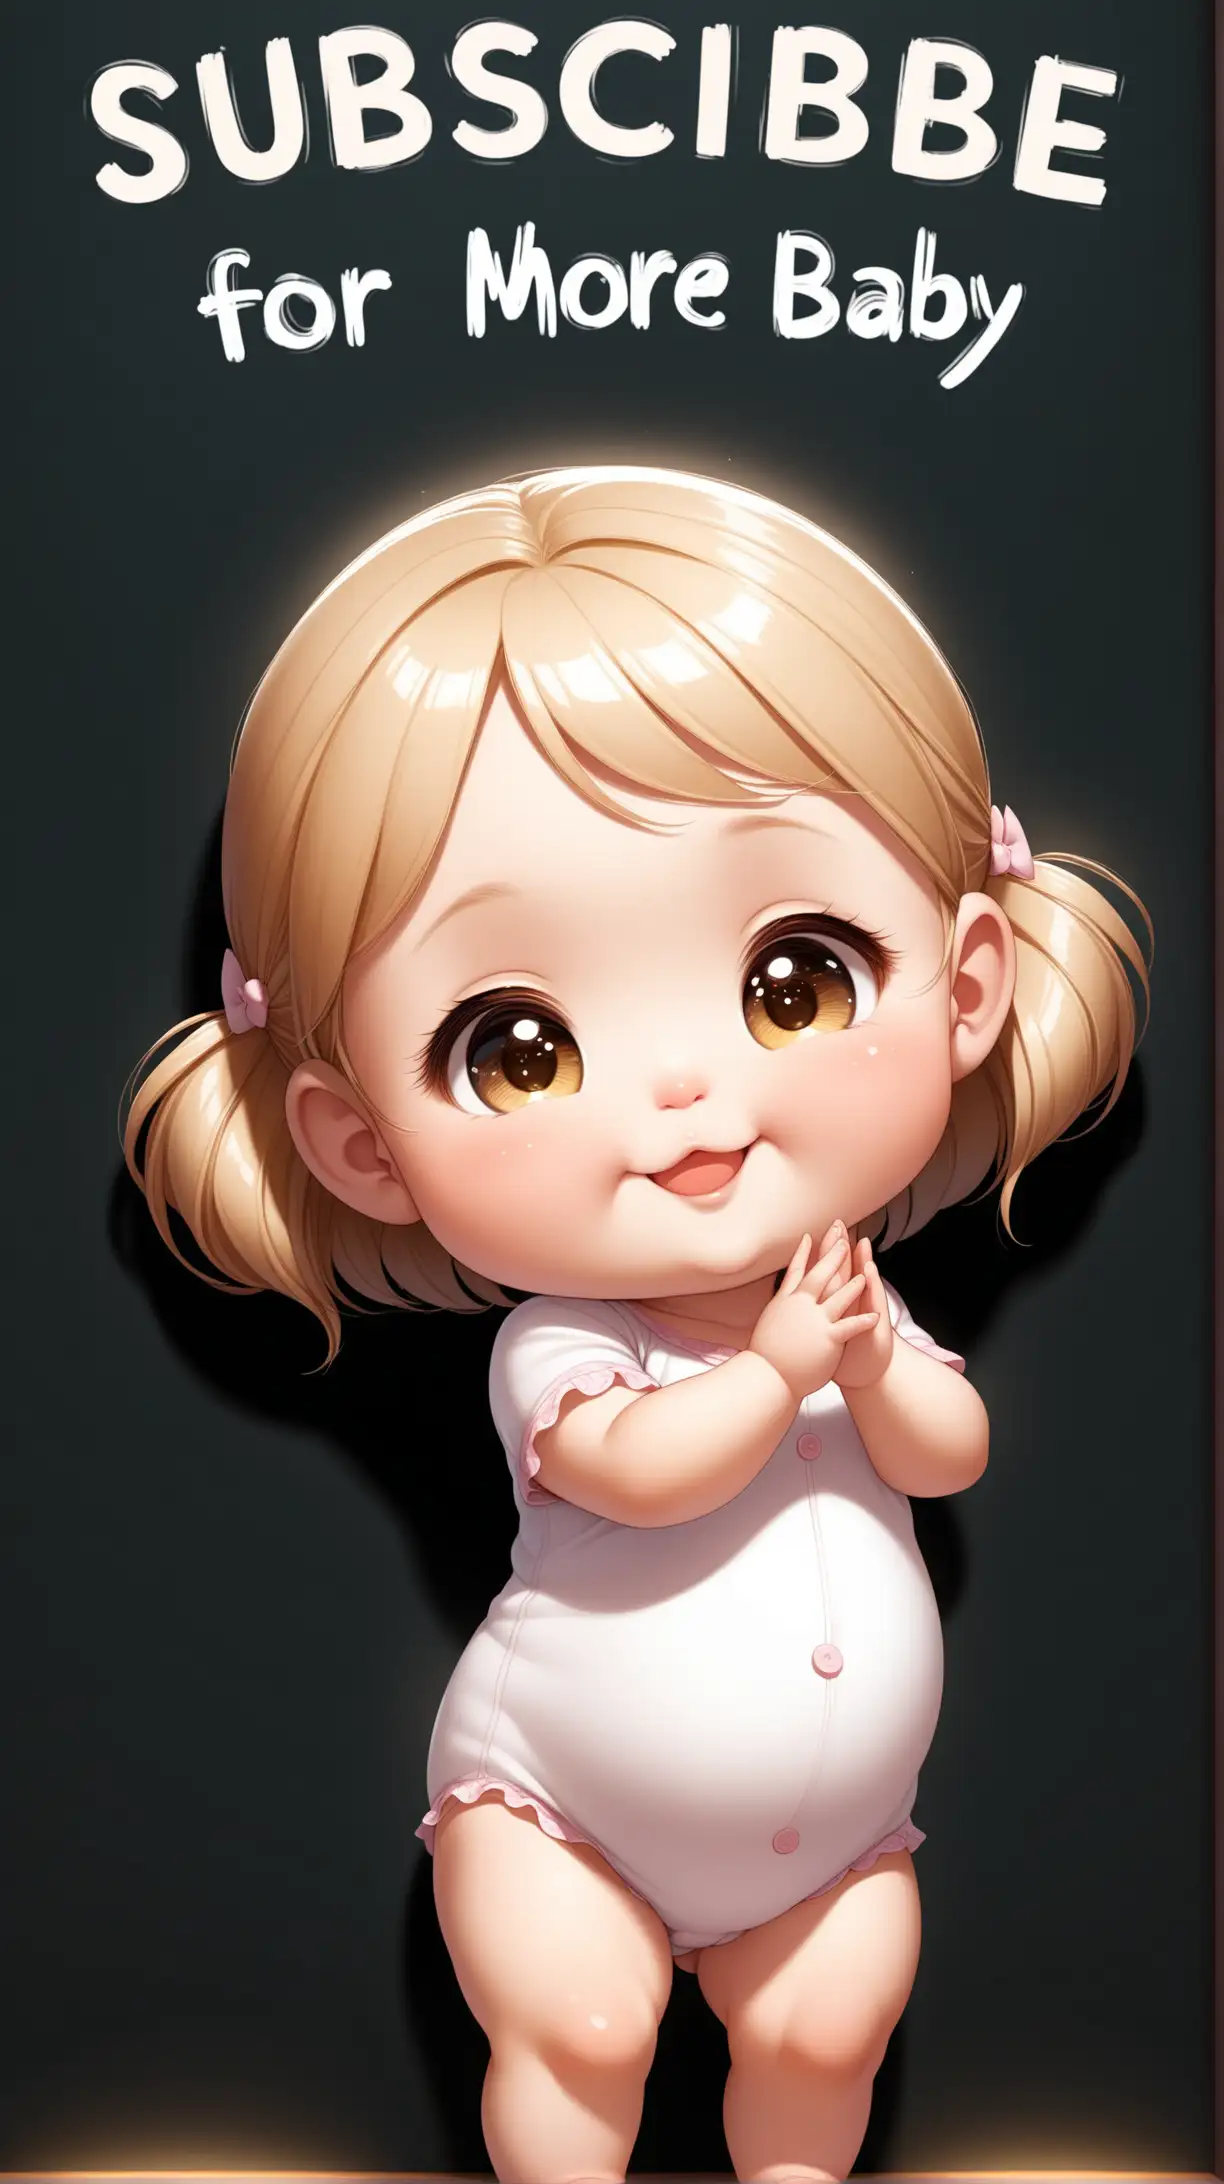 Create a 3D illustrator of an animated scene where a beautiful girl baby with chubby cheeks, beautiful eyes, she is standing with a chalkboard written on "Subscribe for more!" .The chubbier little girl baby is smiling peacefully. Beautiful and dark background illustrations.